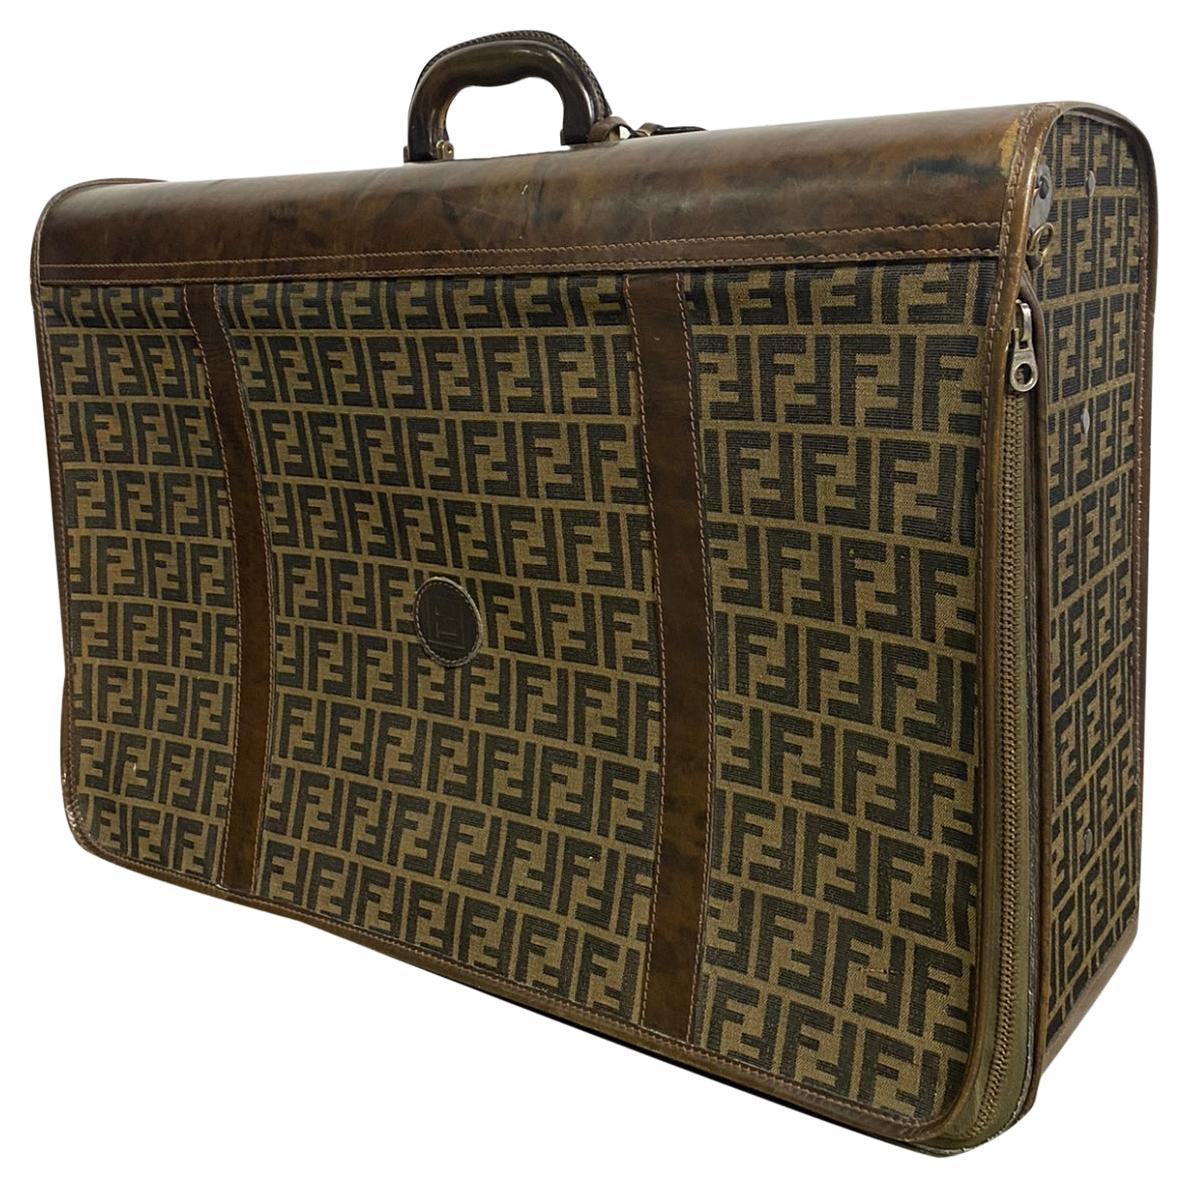 Fendi Vintage suitcase, in logoed canvas and leather parts.